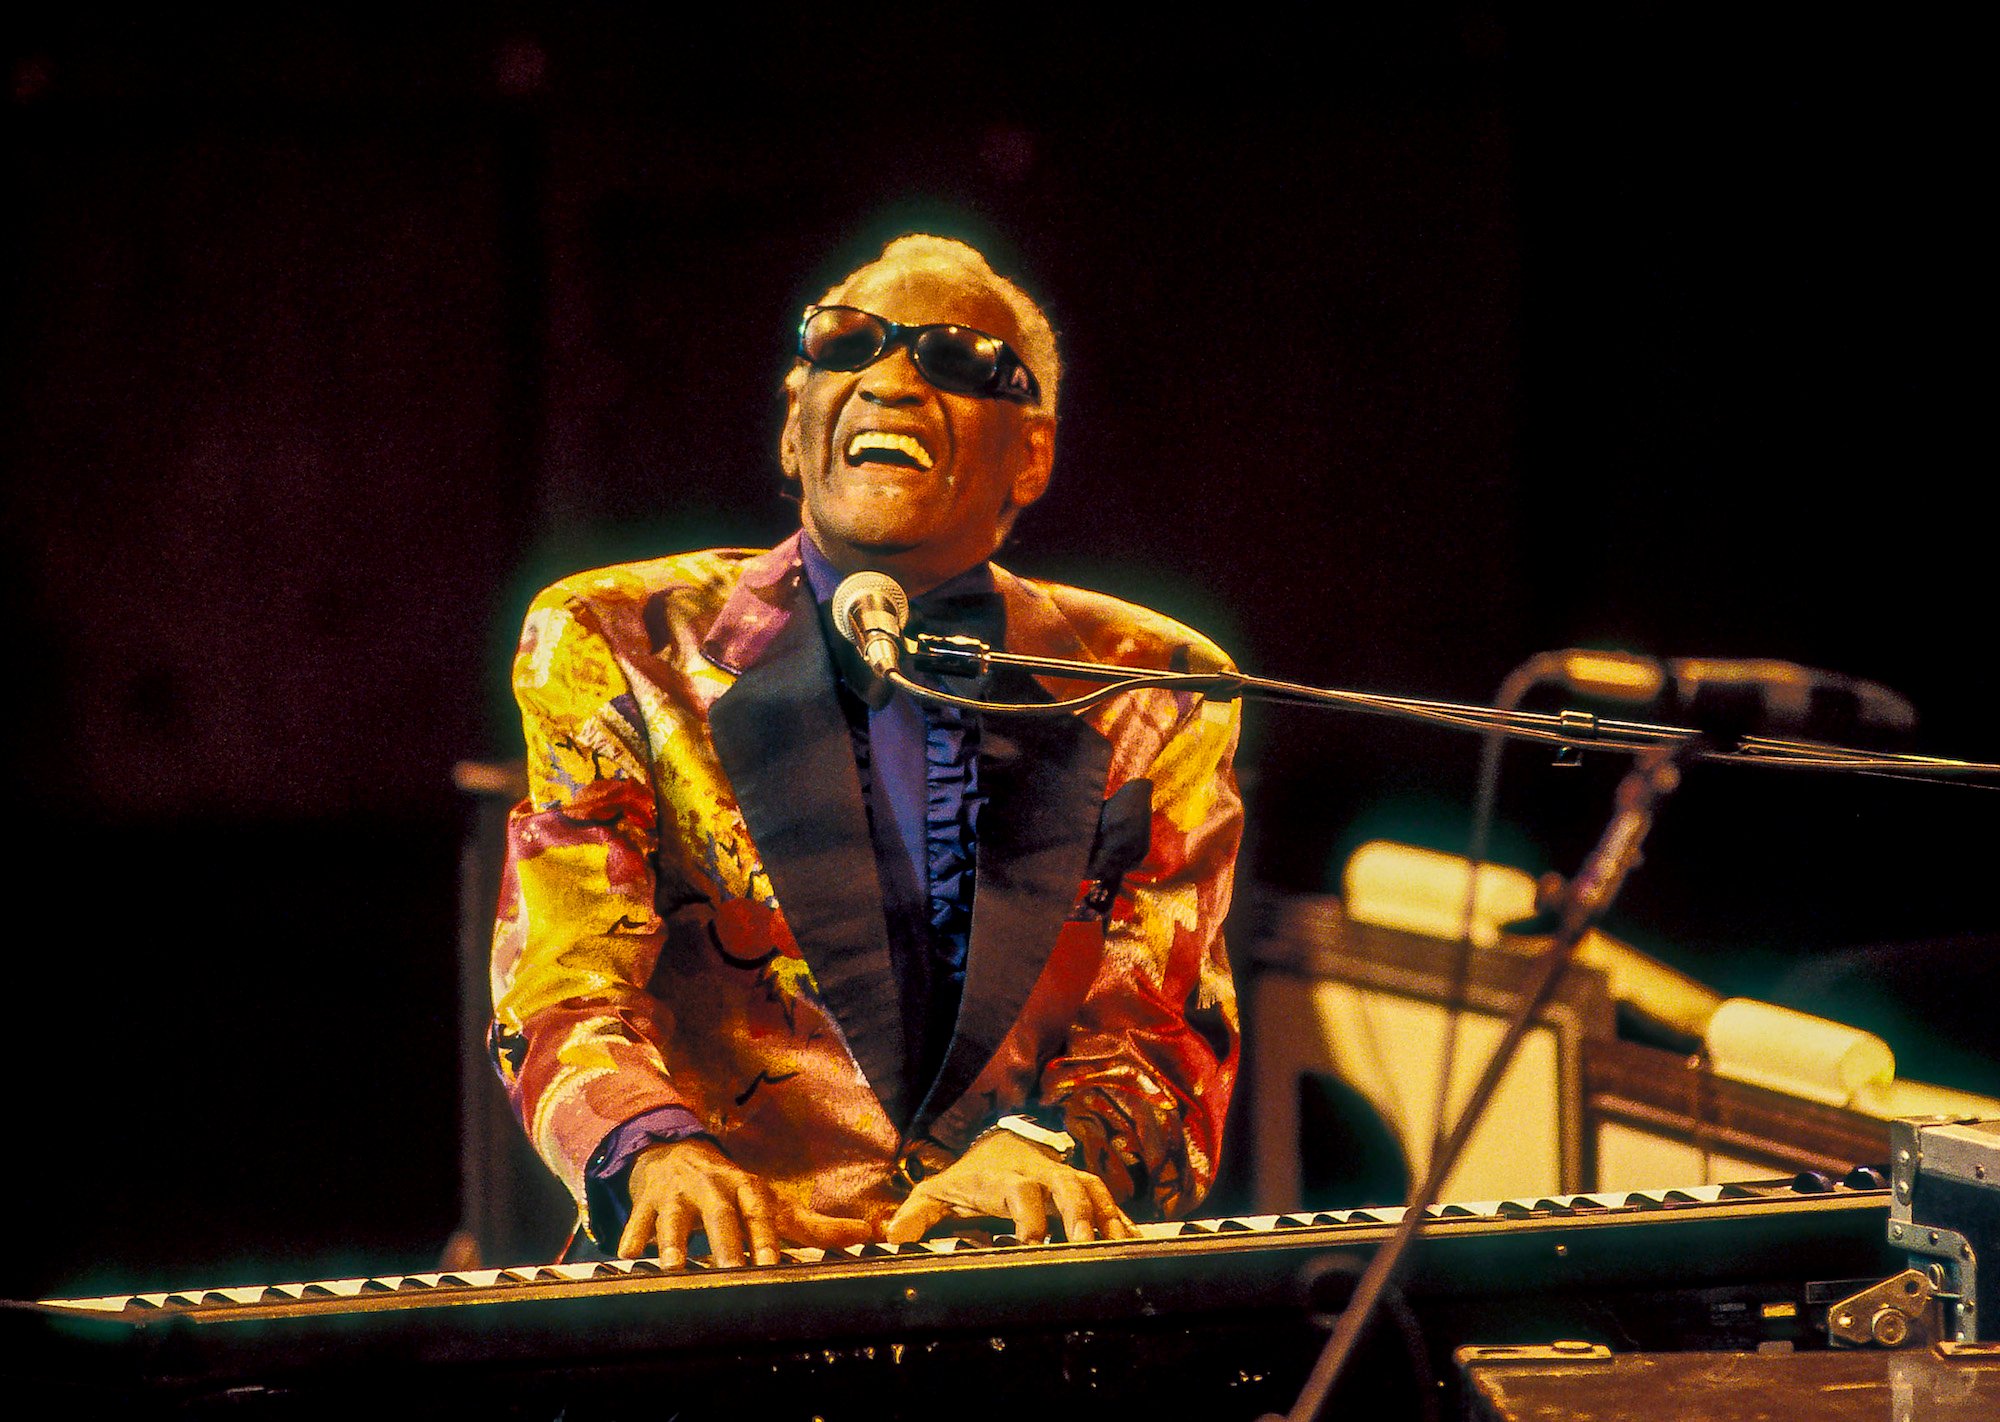 Ray Charles singing and playing on a keyboard